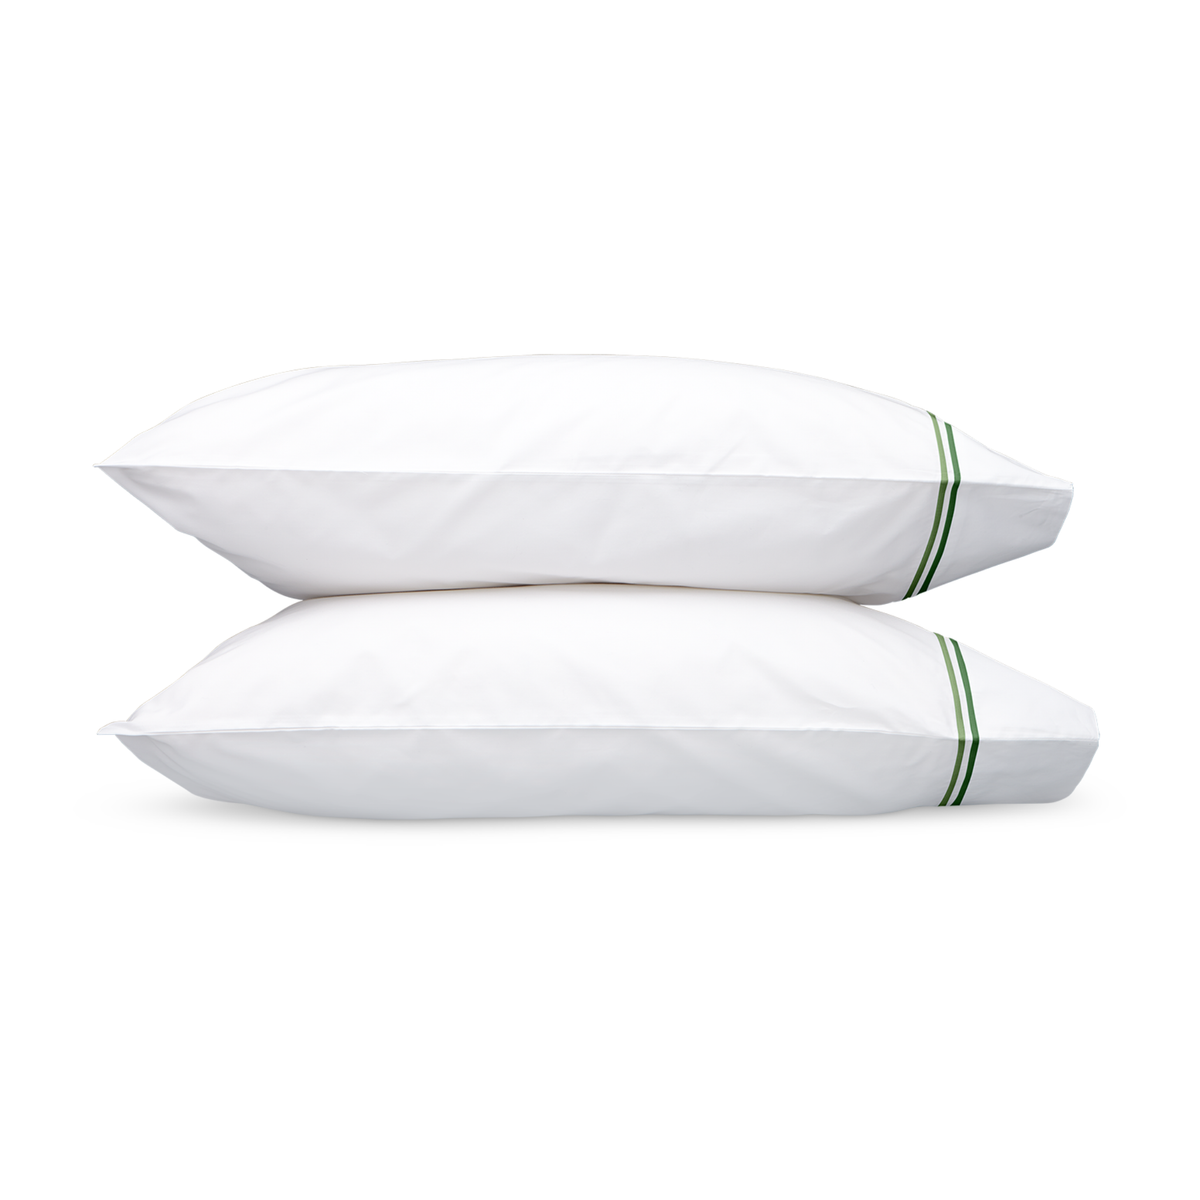 Pair of Pillowcases of Matouk Essex Bedding Collection in Green Color